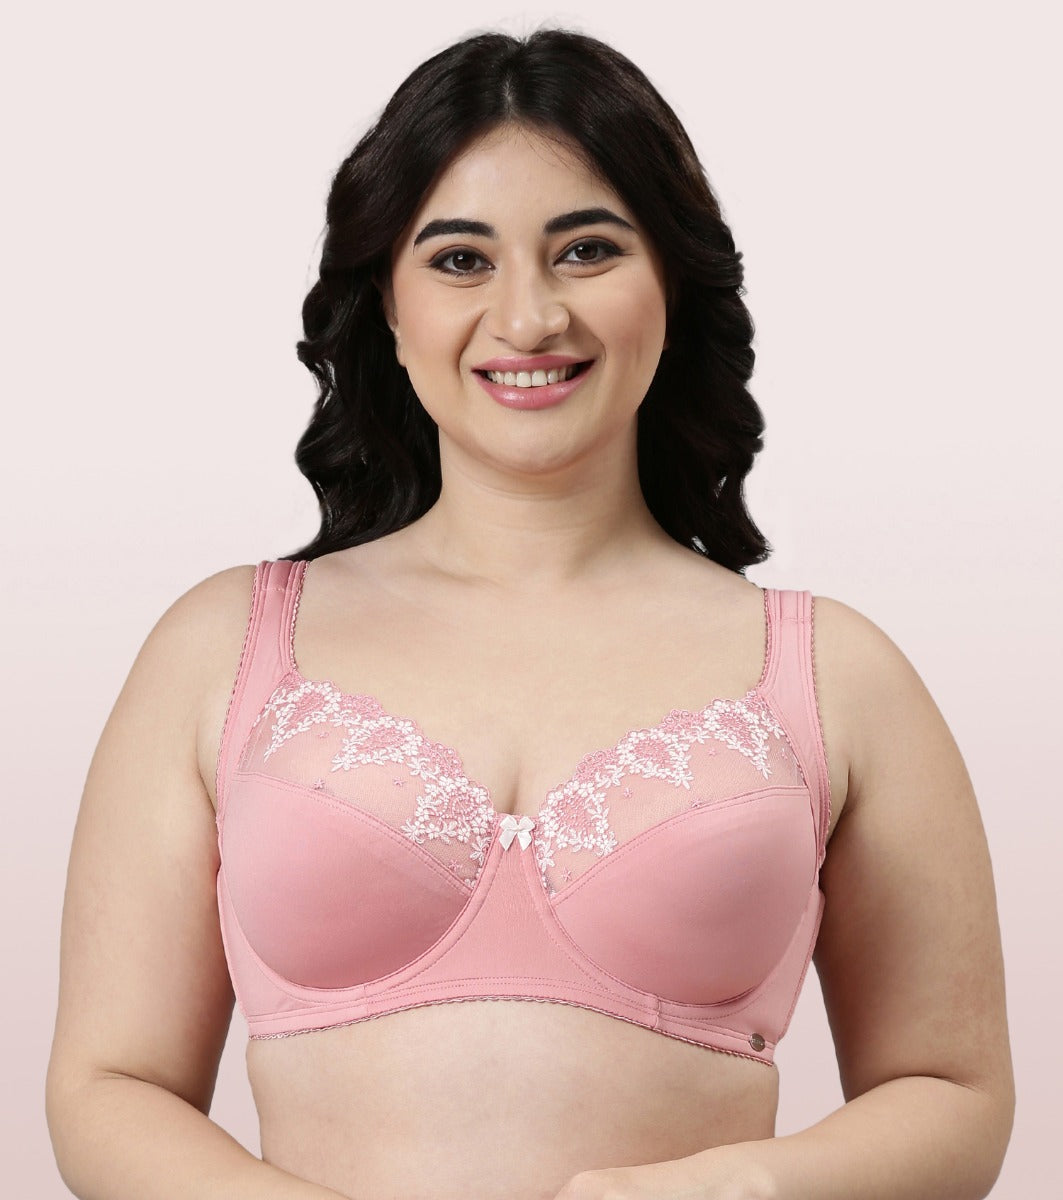 Enamor 40B Size Bras Price Starting From Rs 1,104. Find Verified Sellers in  Mumbai - JdMart